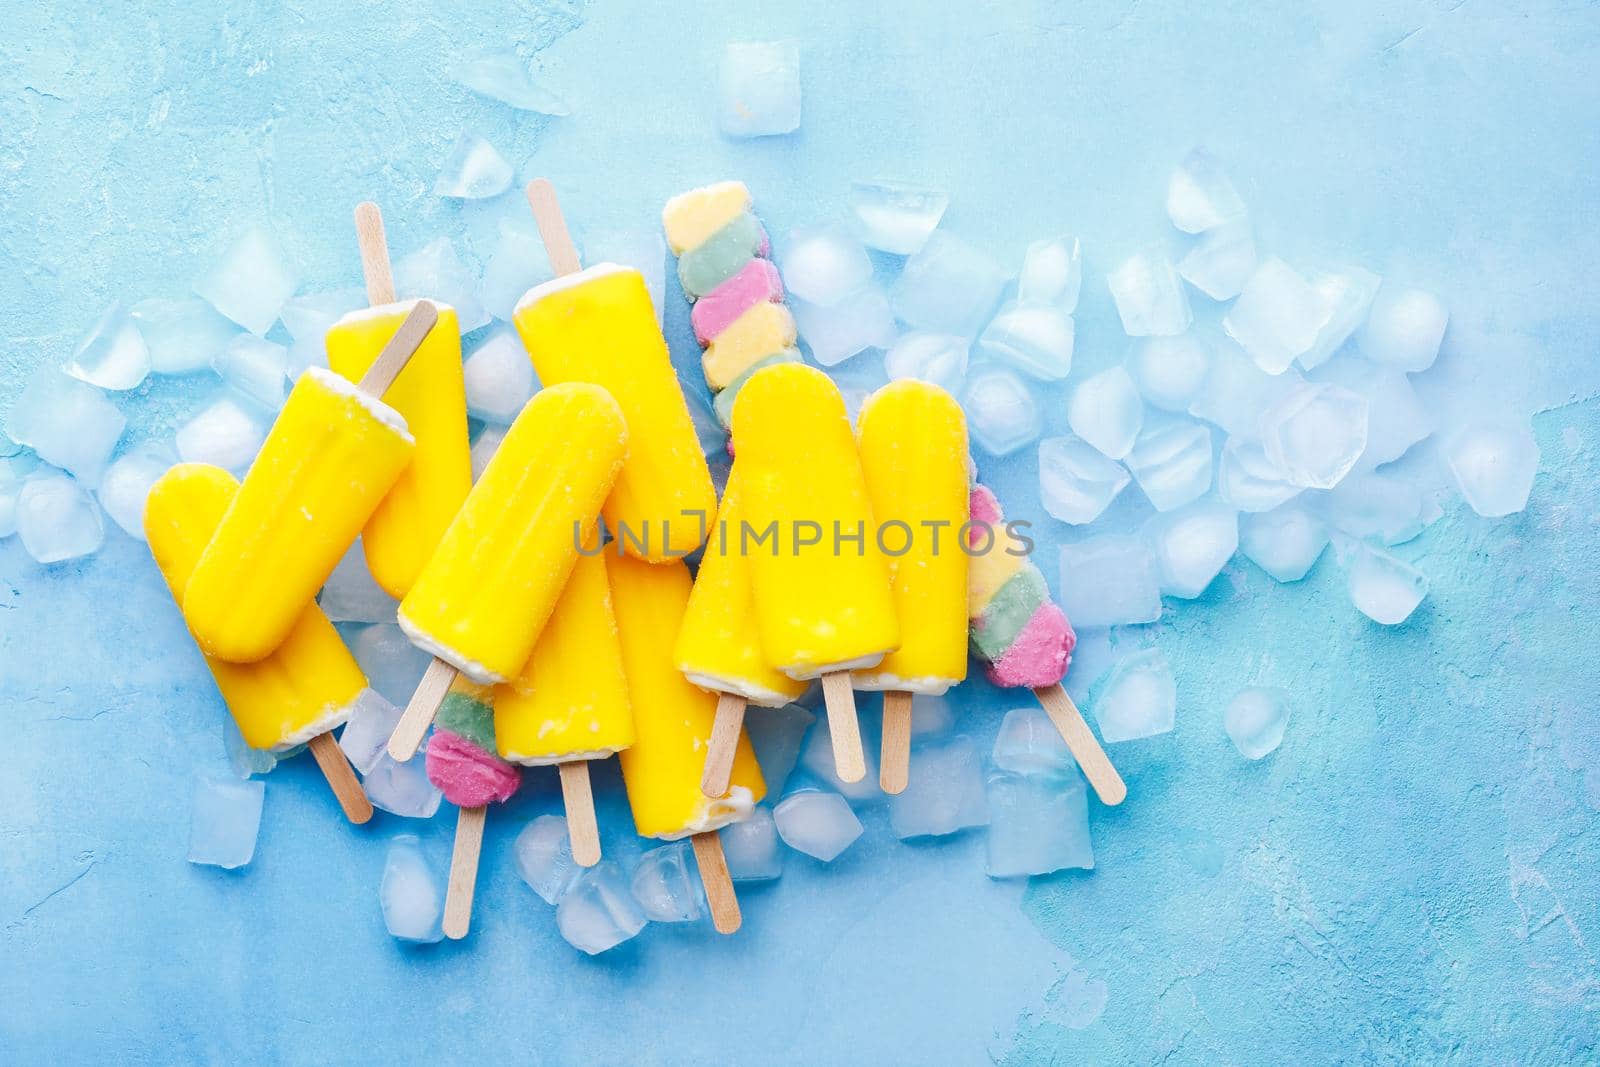 Exotic fruit ice cream sticks on blue background with ice cubes. Top view, blank space